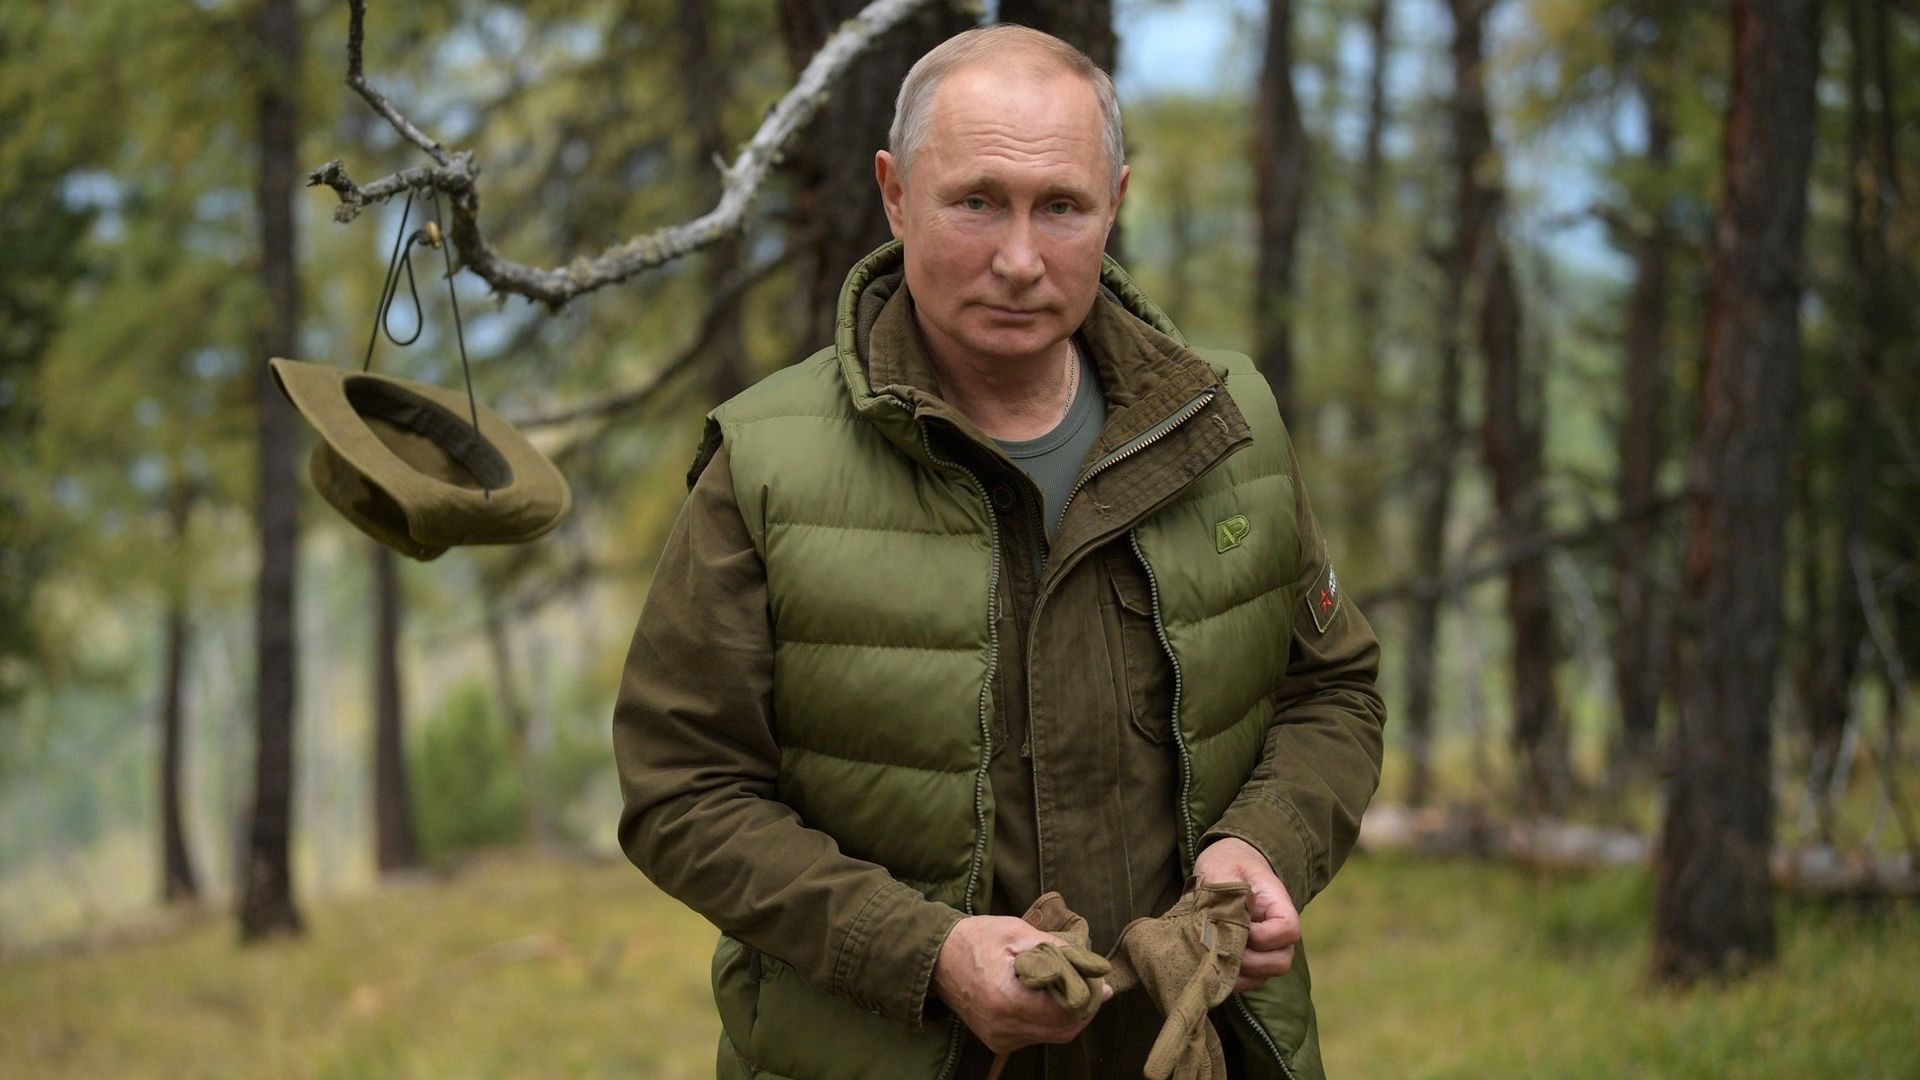 Russian President Vladimir Putin spends time in the Siberian Taiga forest to take a break from state affairs ahead of his birthday in Siberia